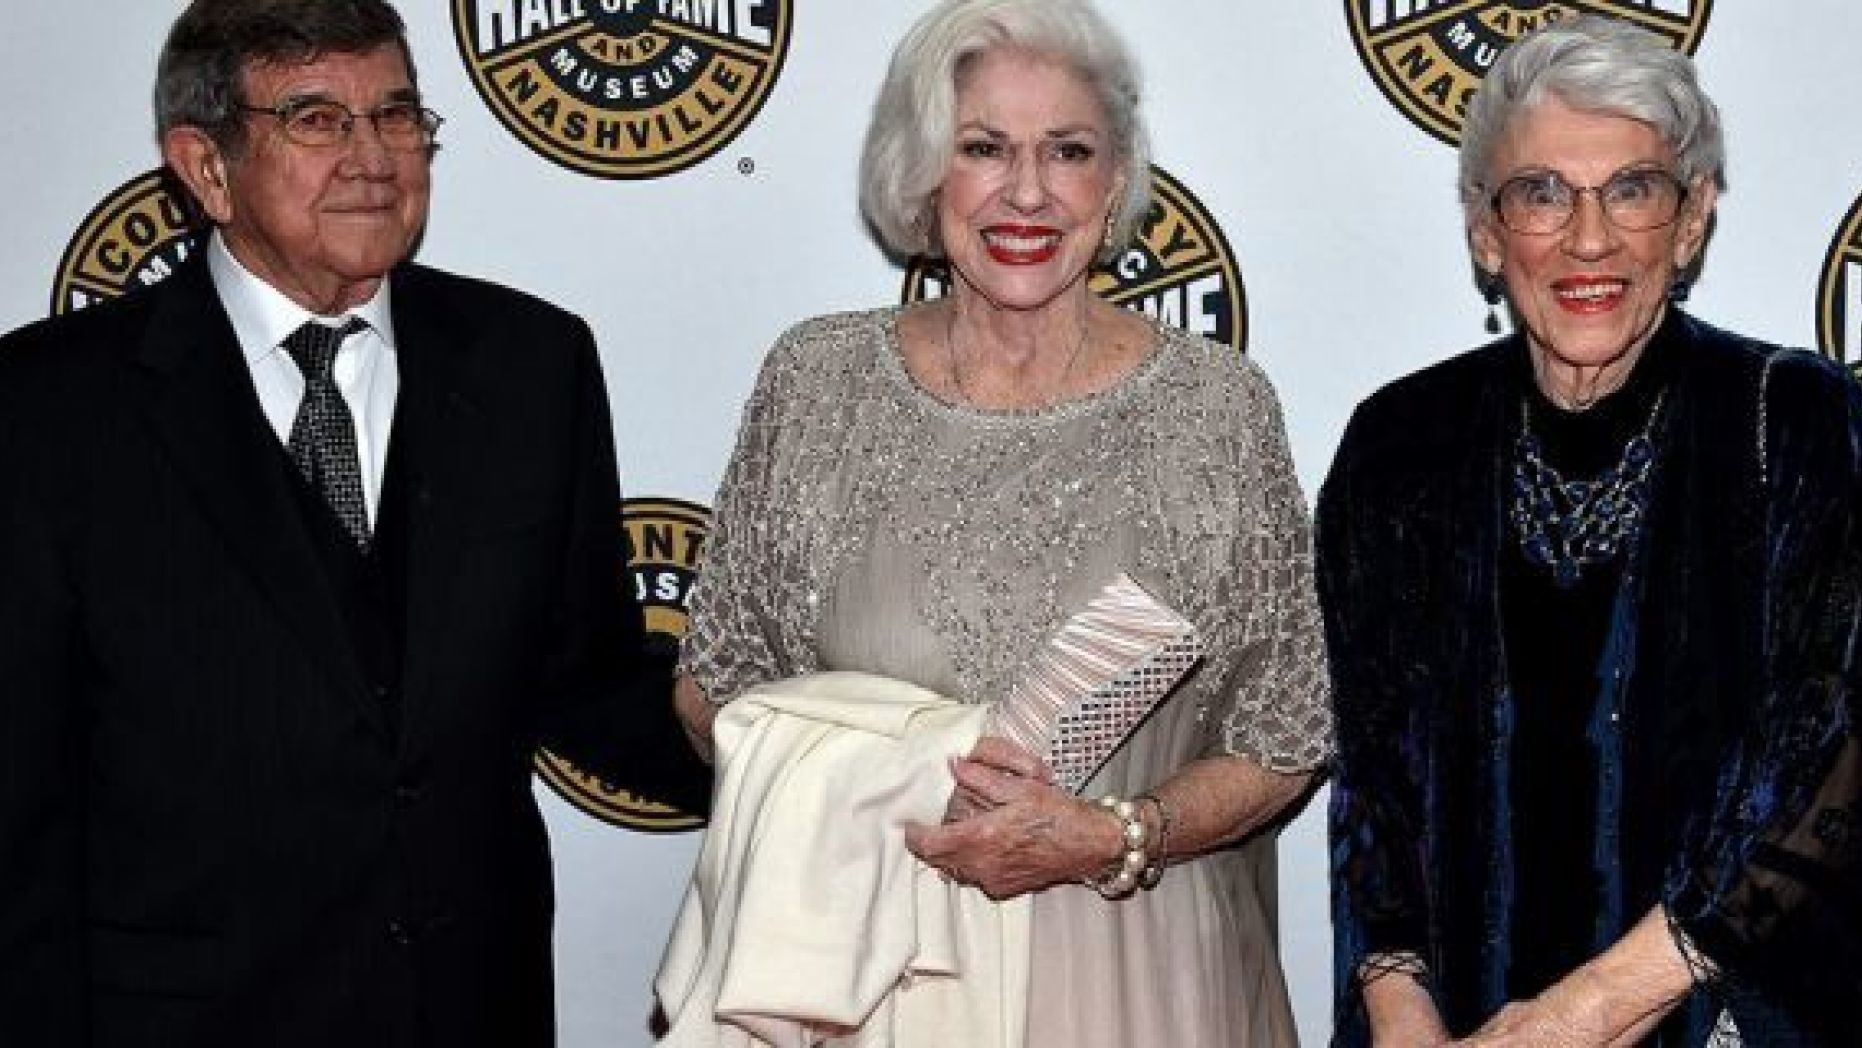 From l-r: Bonnie Brown, Maxine Brown and guest attend The Country Music Hall of Fame 2015 Medallion Ceremony at the Country Music Hall of Fame and Museum on October 25, 2015 in Nashville, Tennessee. (Photo by John Shearer/Getty Images for CMHOF)